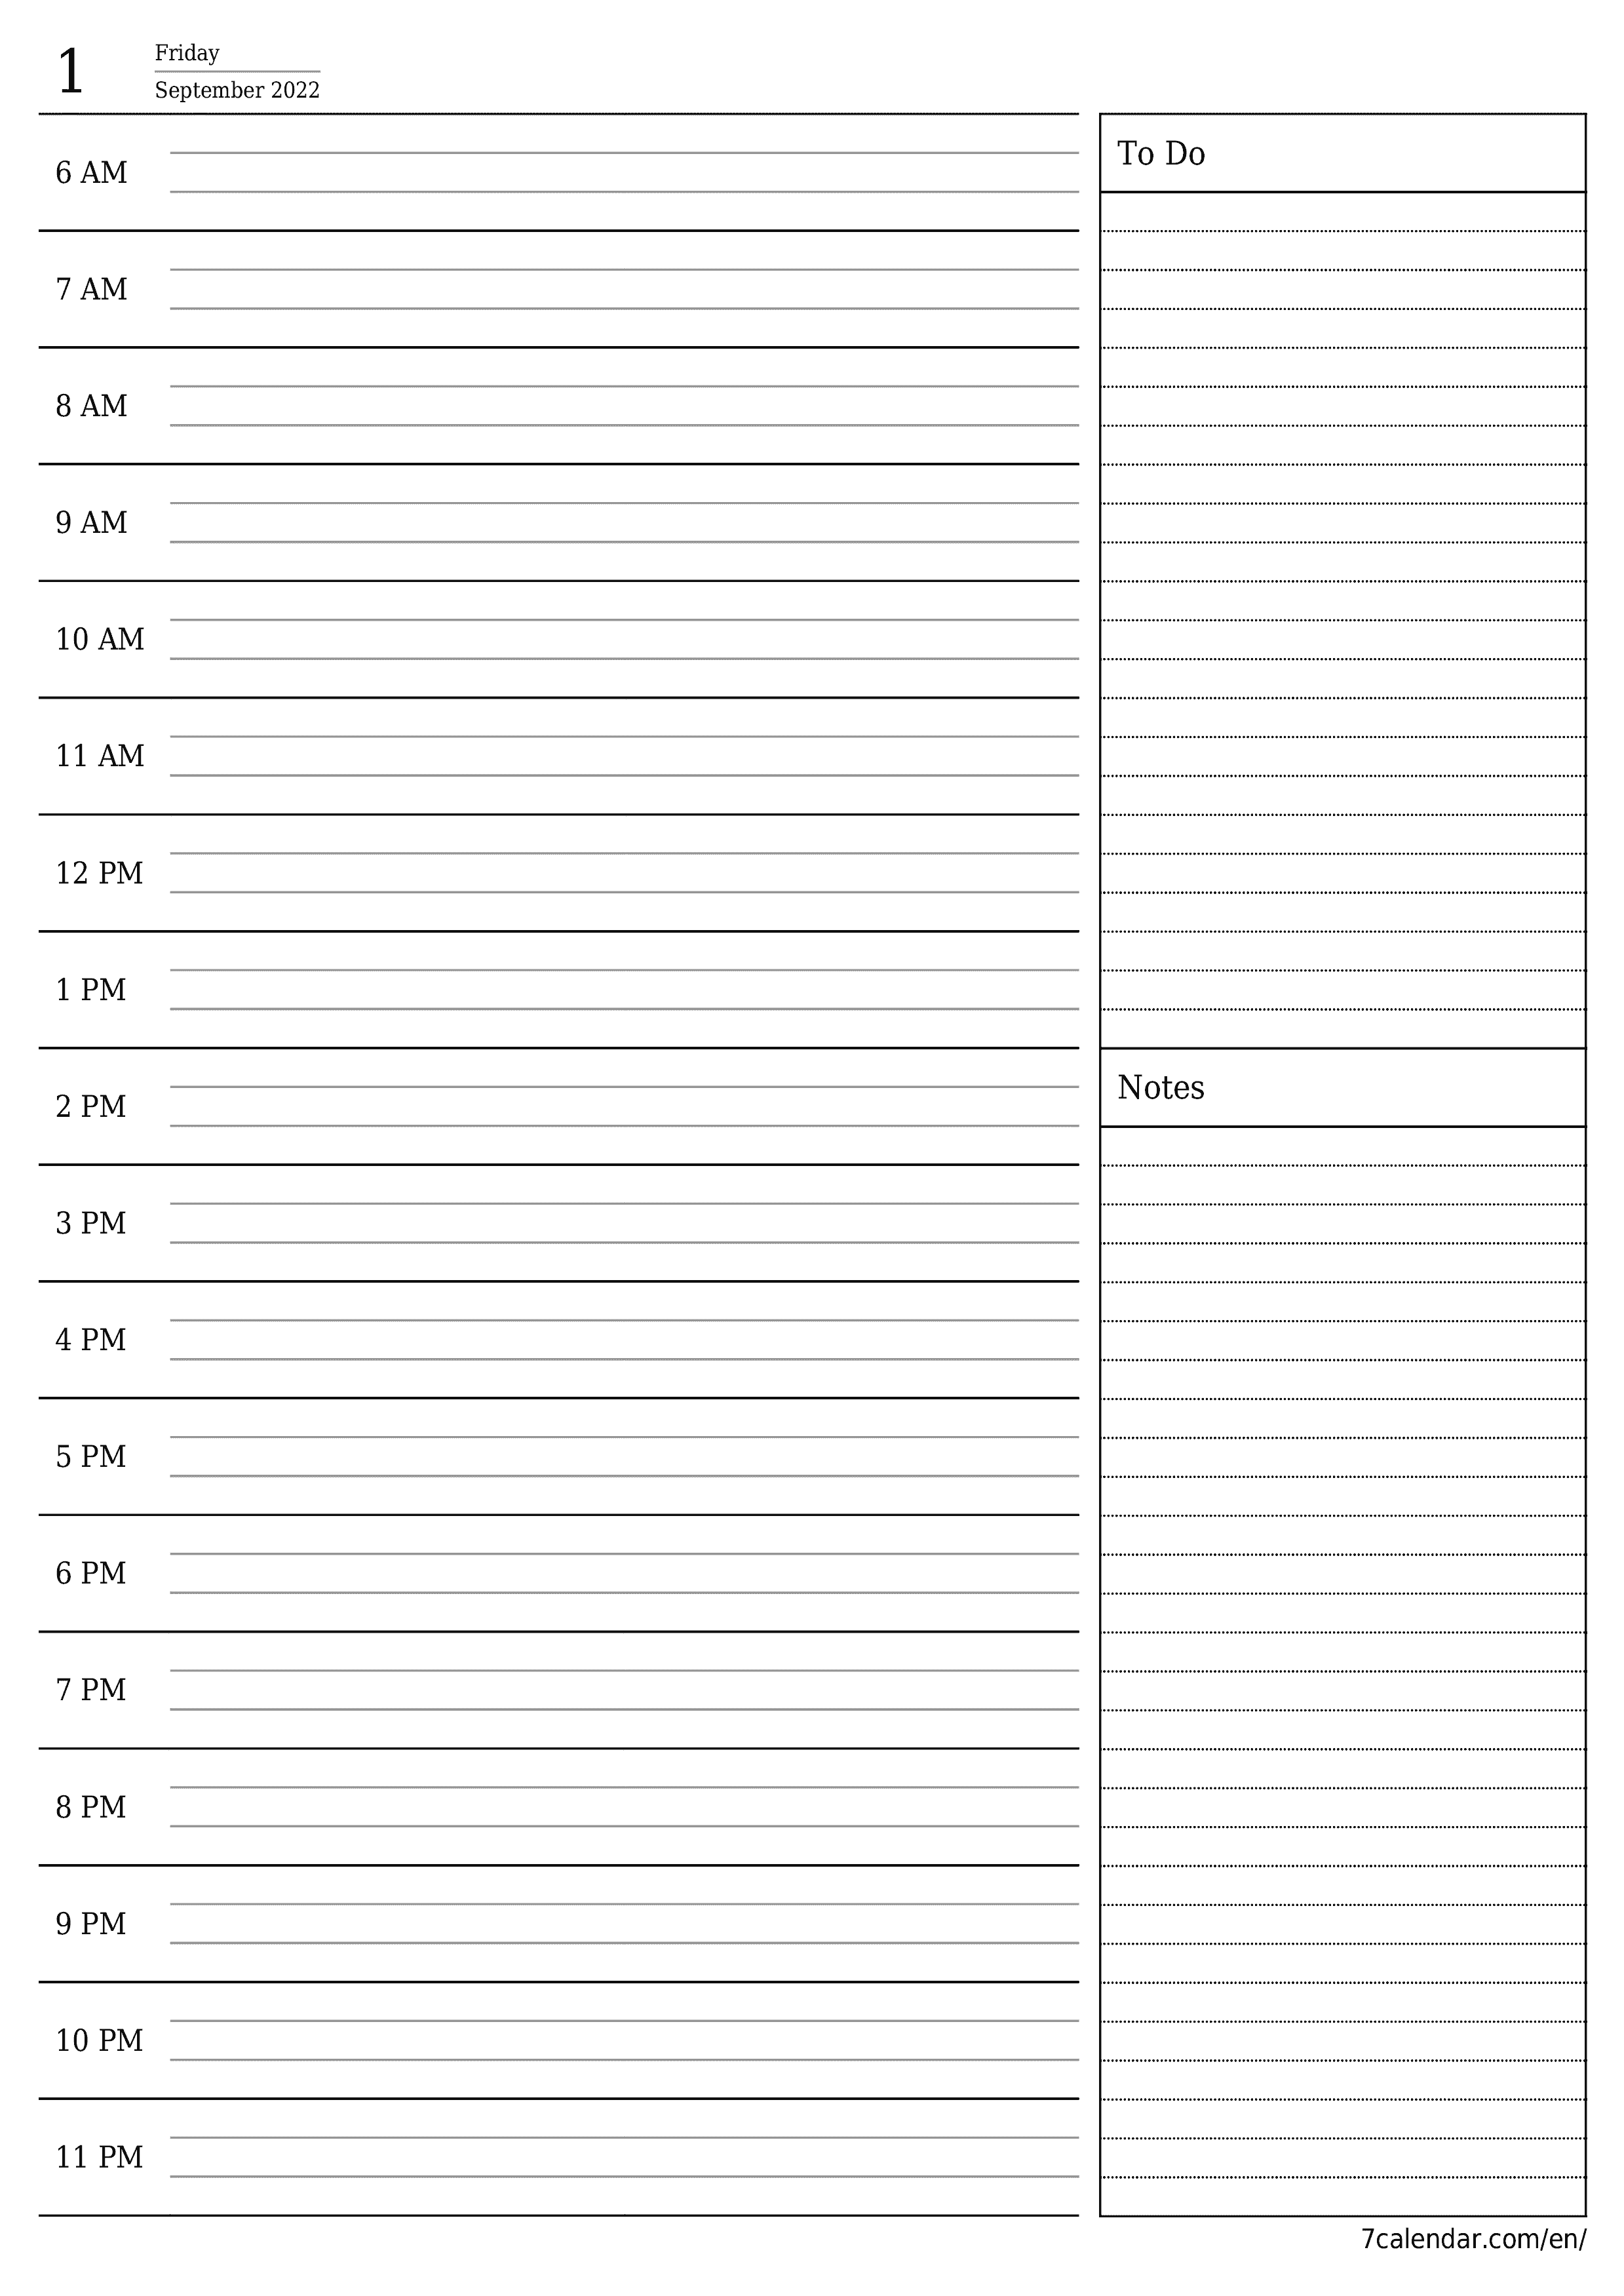 Blank daily calendar planner for day September 2022 with notes, save and print to PDF PNG English - 7calendar.com